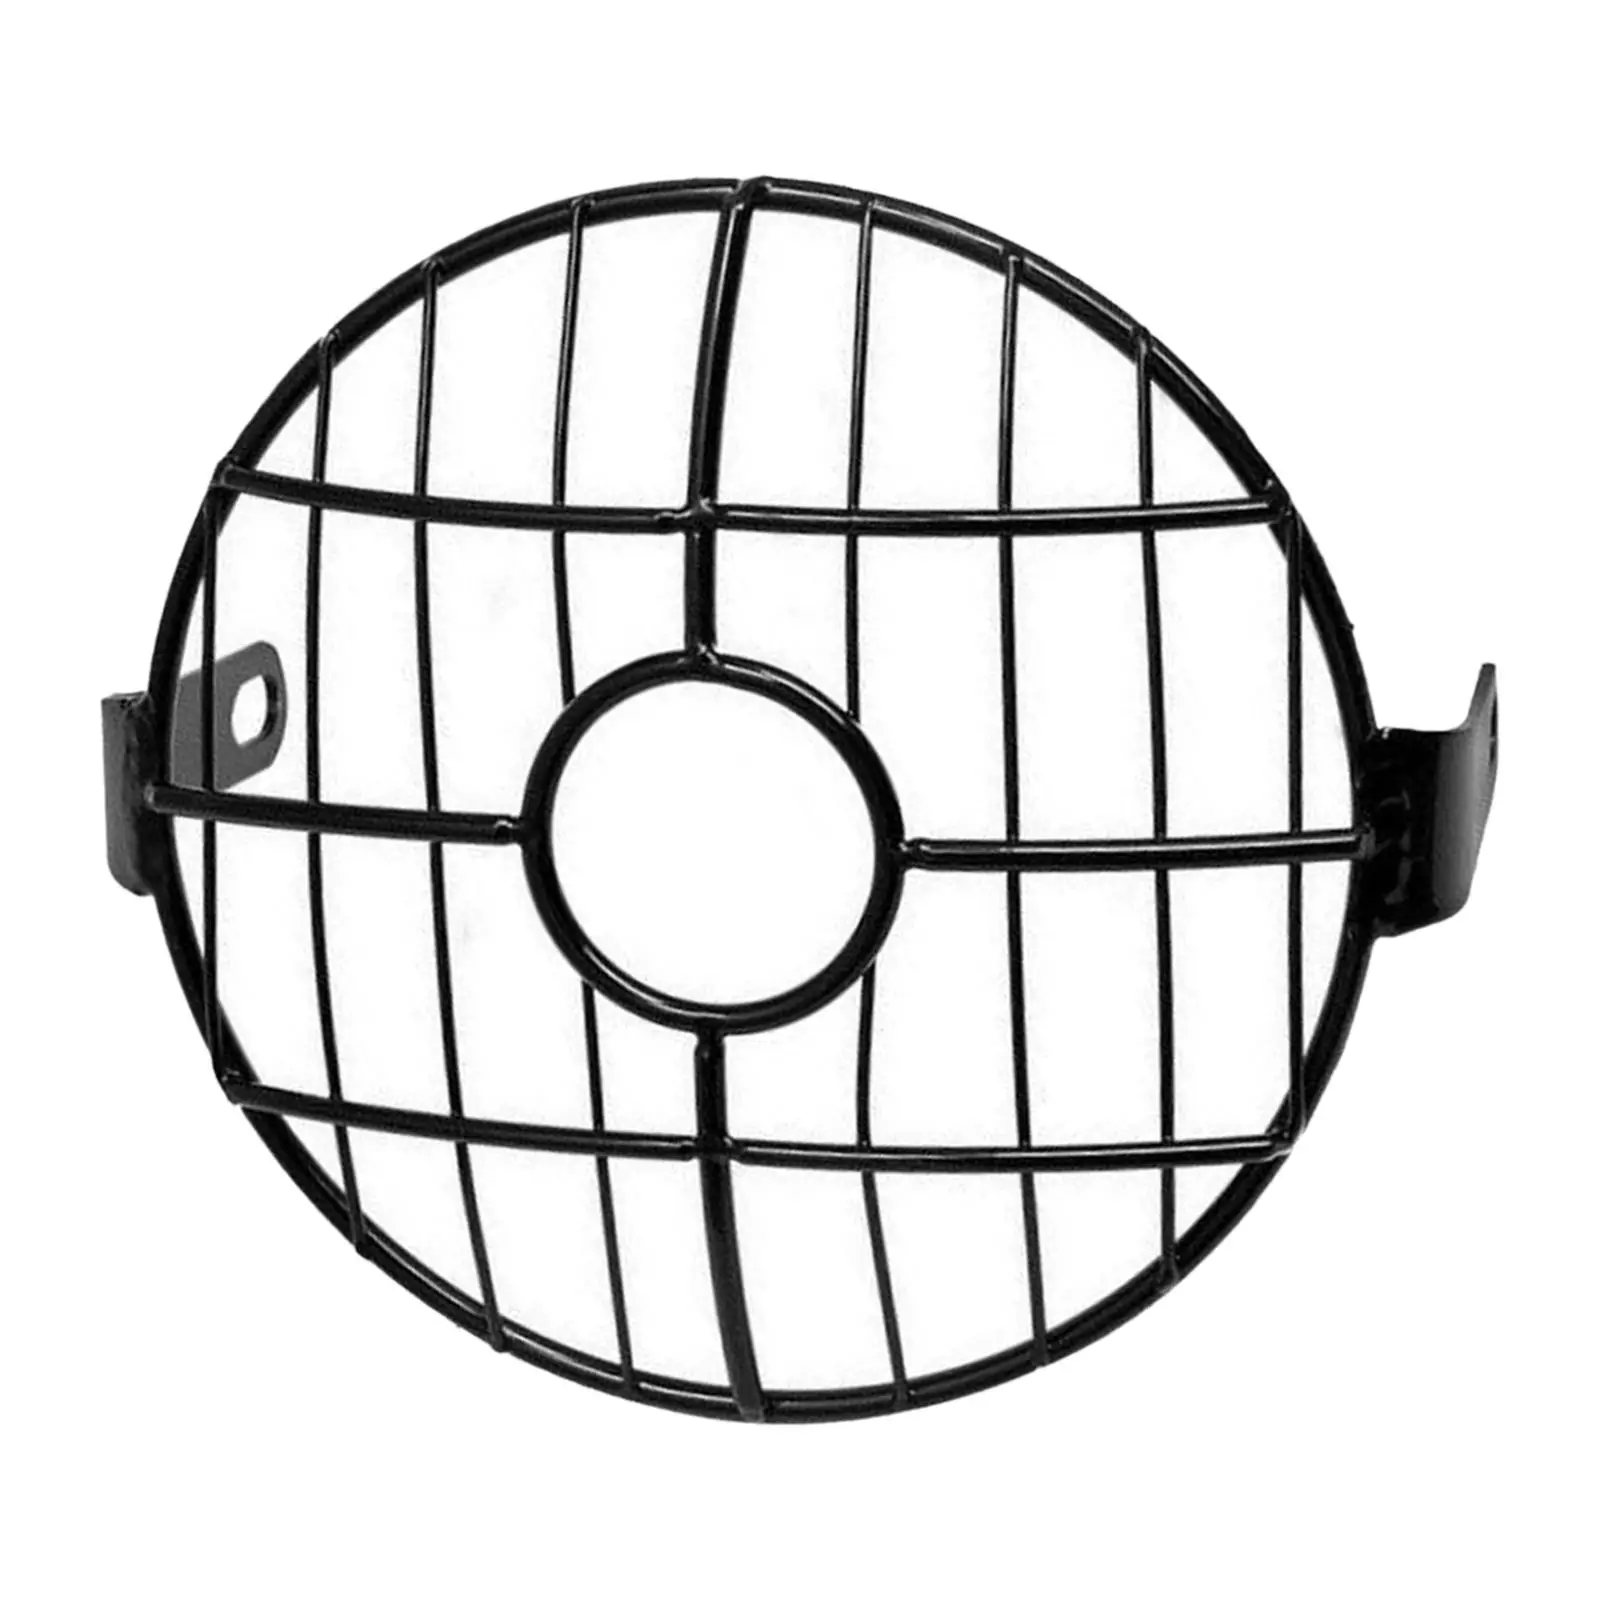 6.5 inch Motorcycle Headlight Motorbike Front Lamp Mesh Grille Cover Protector for Cafe Racer